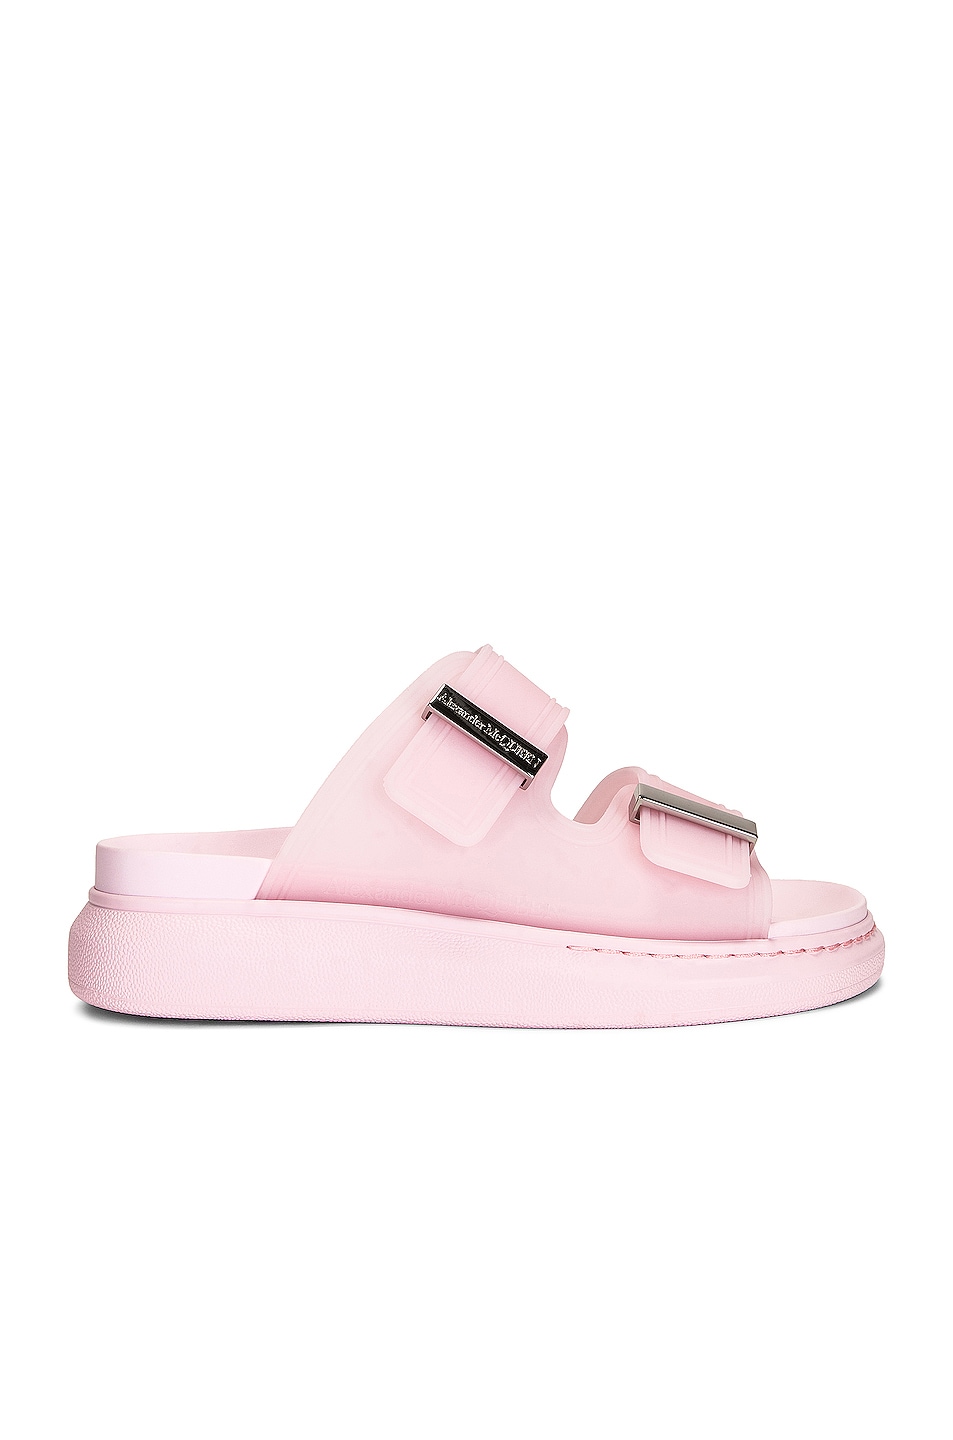 Image 1 of Alexander McQueen Flat Rubber Sandals in Pale Ice Pink & Silver